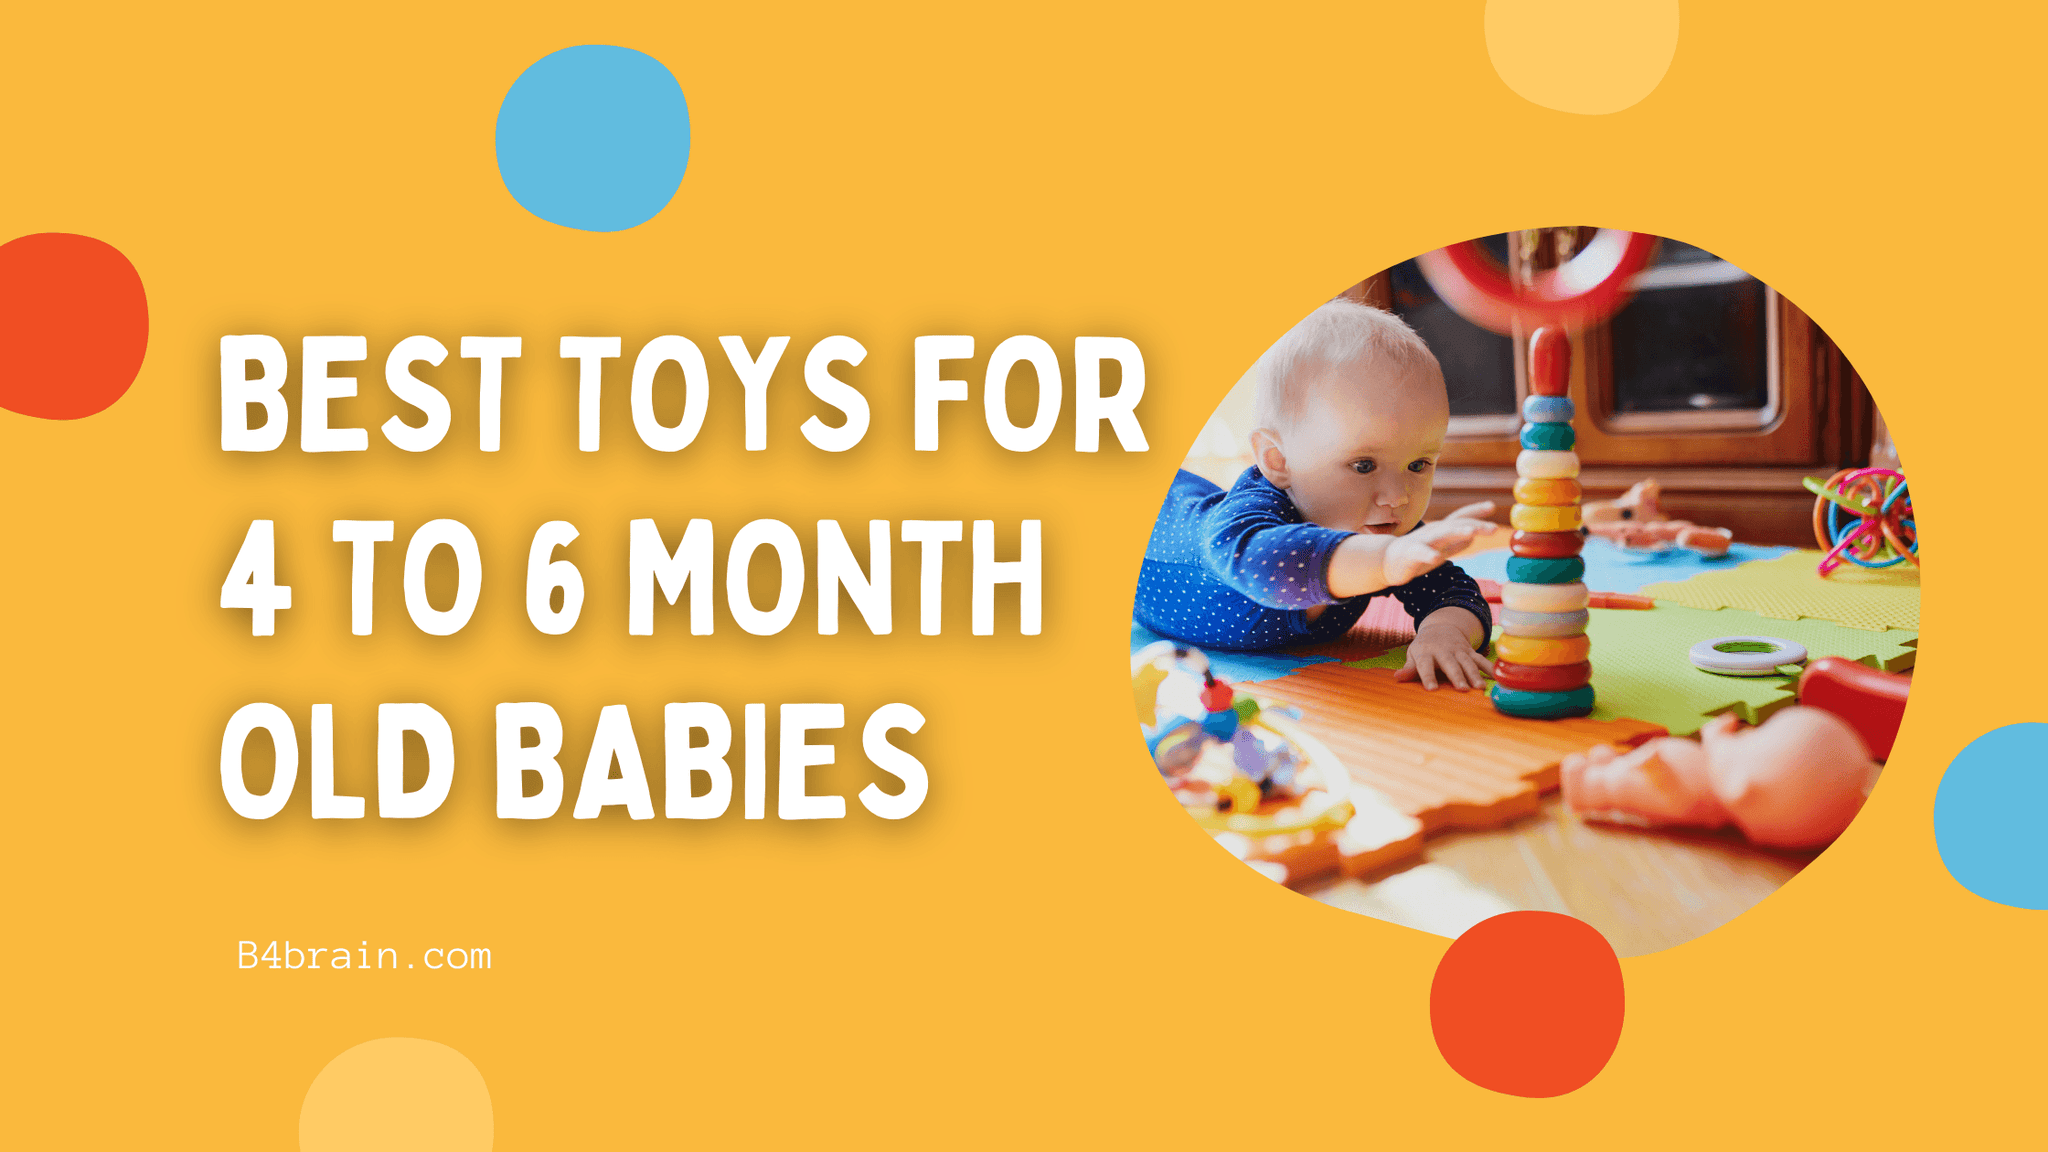 Best Toys For 4 To 6 Month Old Babies